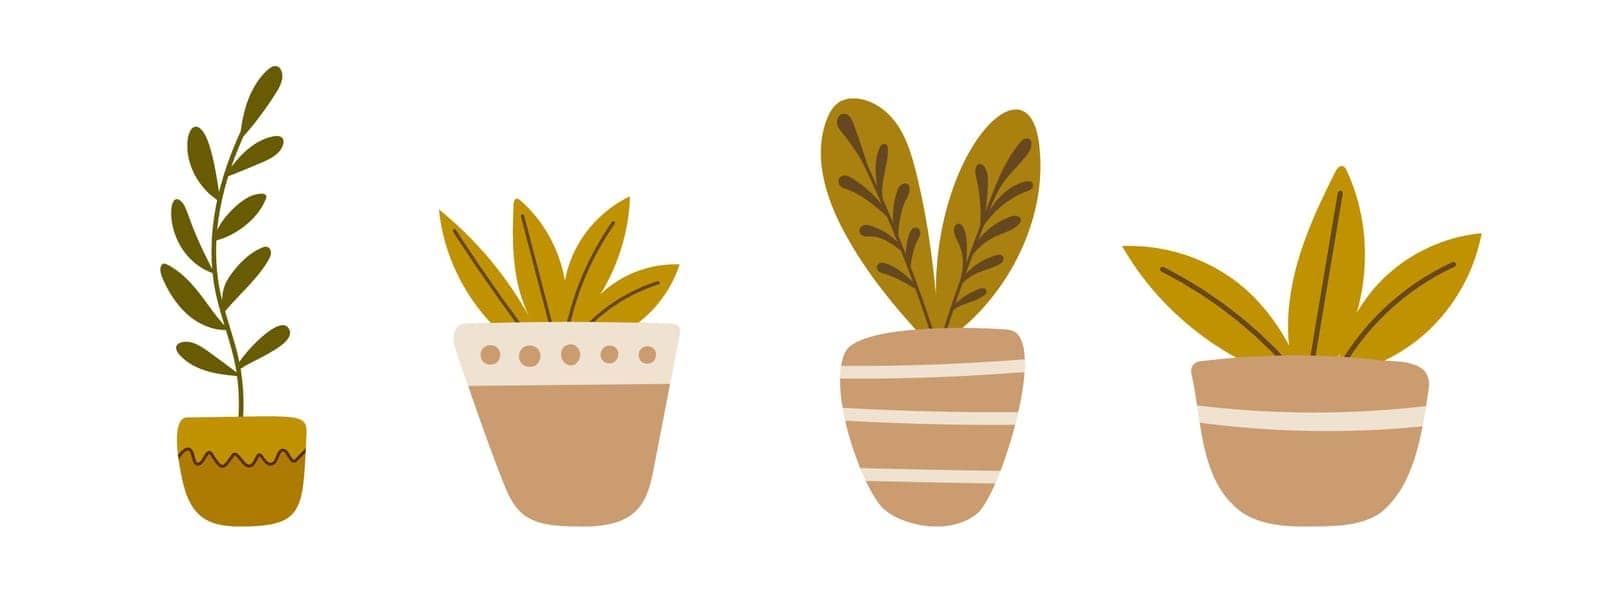 Set of hand drawn potted plants. Home decor, cozy plant. Vector stock illustration.